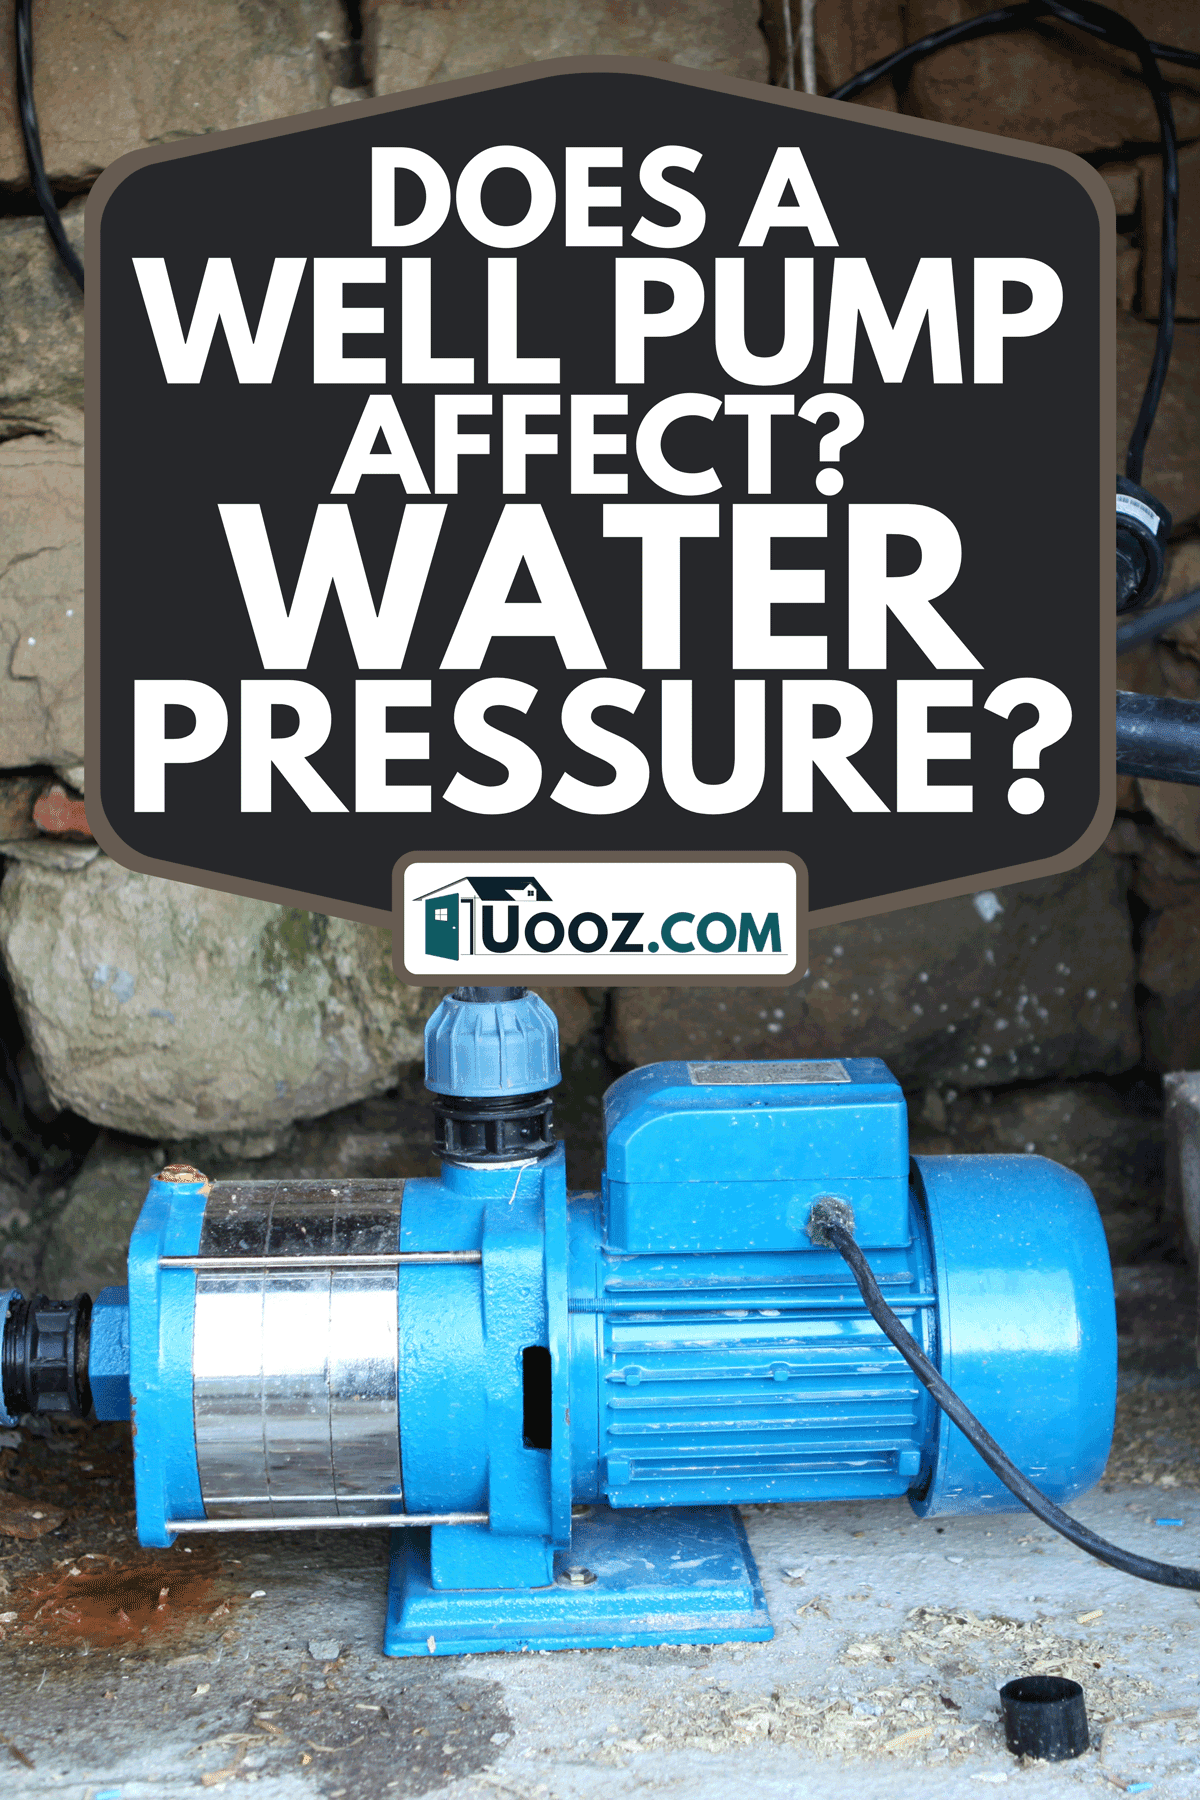 A water pumping station system, Does A Well Pump Affect Water Pressure?